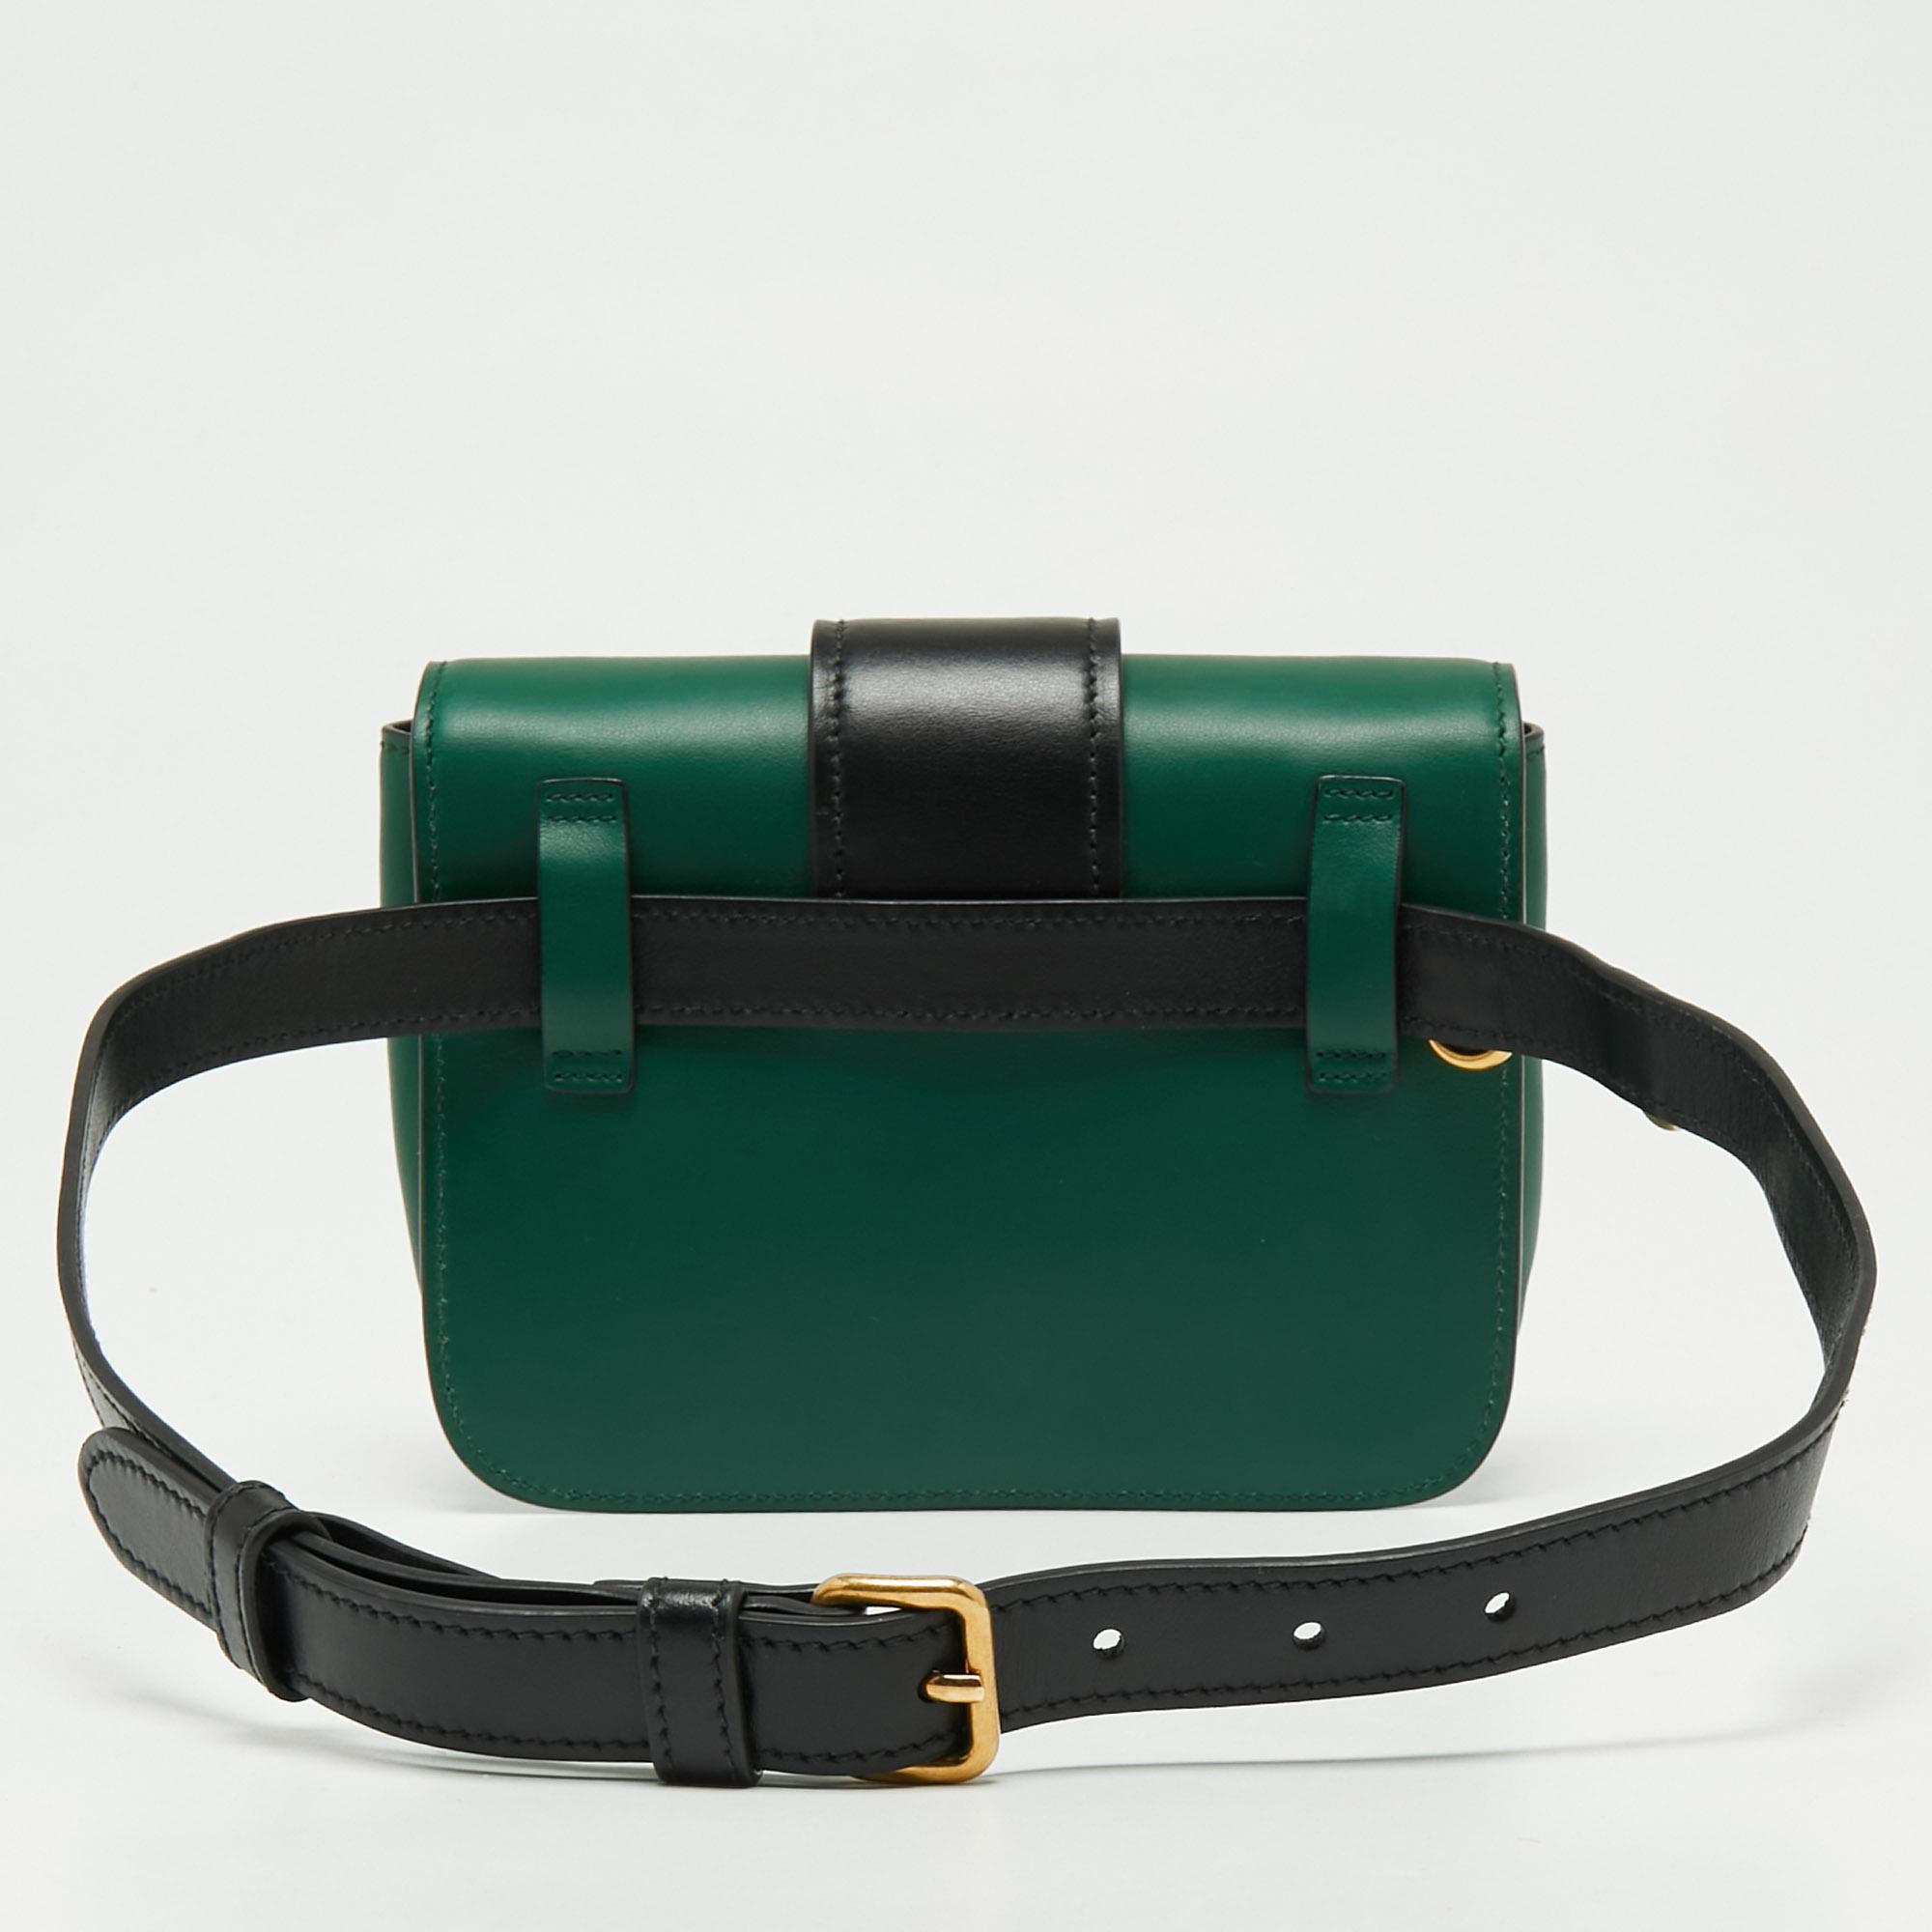 Inspired by valuable books from ancient times, the Cahier by Prada is a best-seller. This belt bag is crafted in Italy using green and black leather. The band-detailed flap with the brand logo opens to a compact interior and the waist belt strap